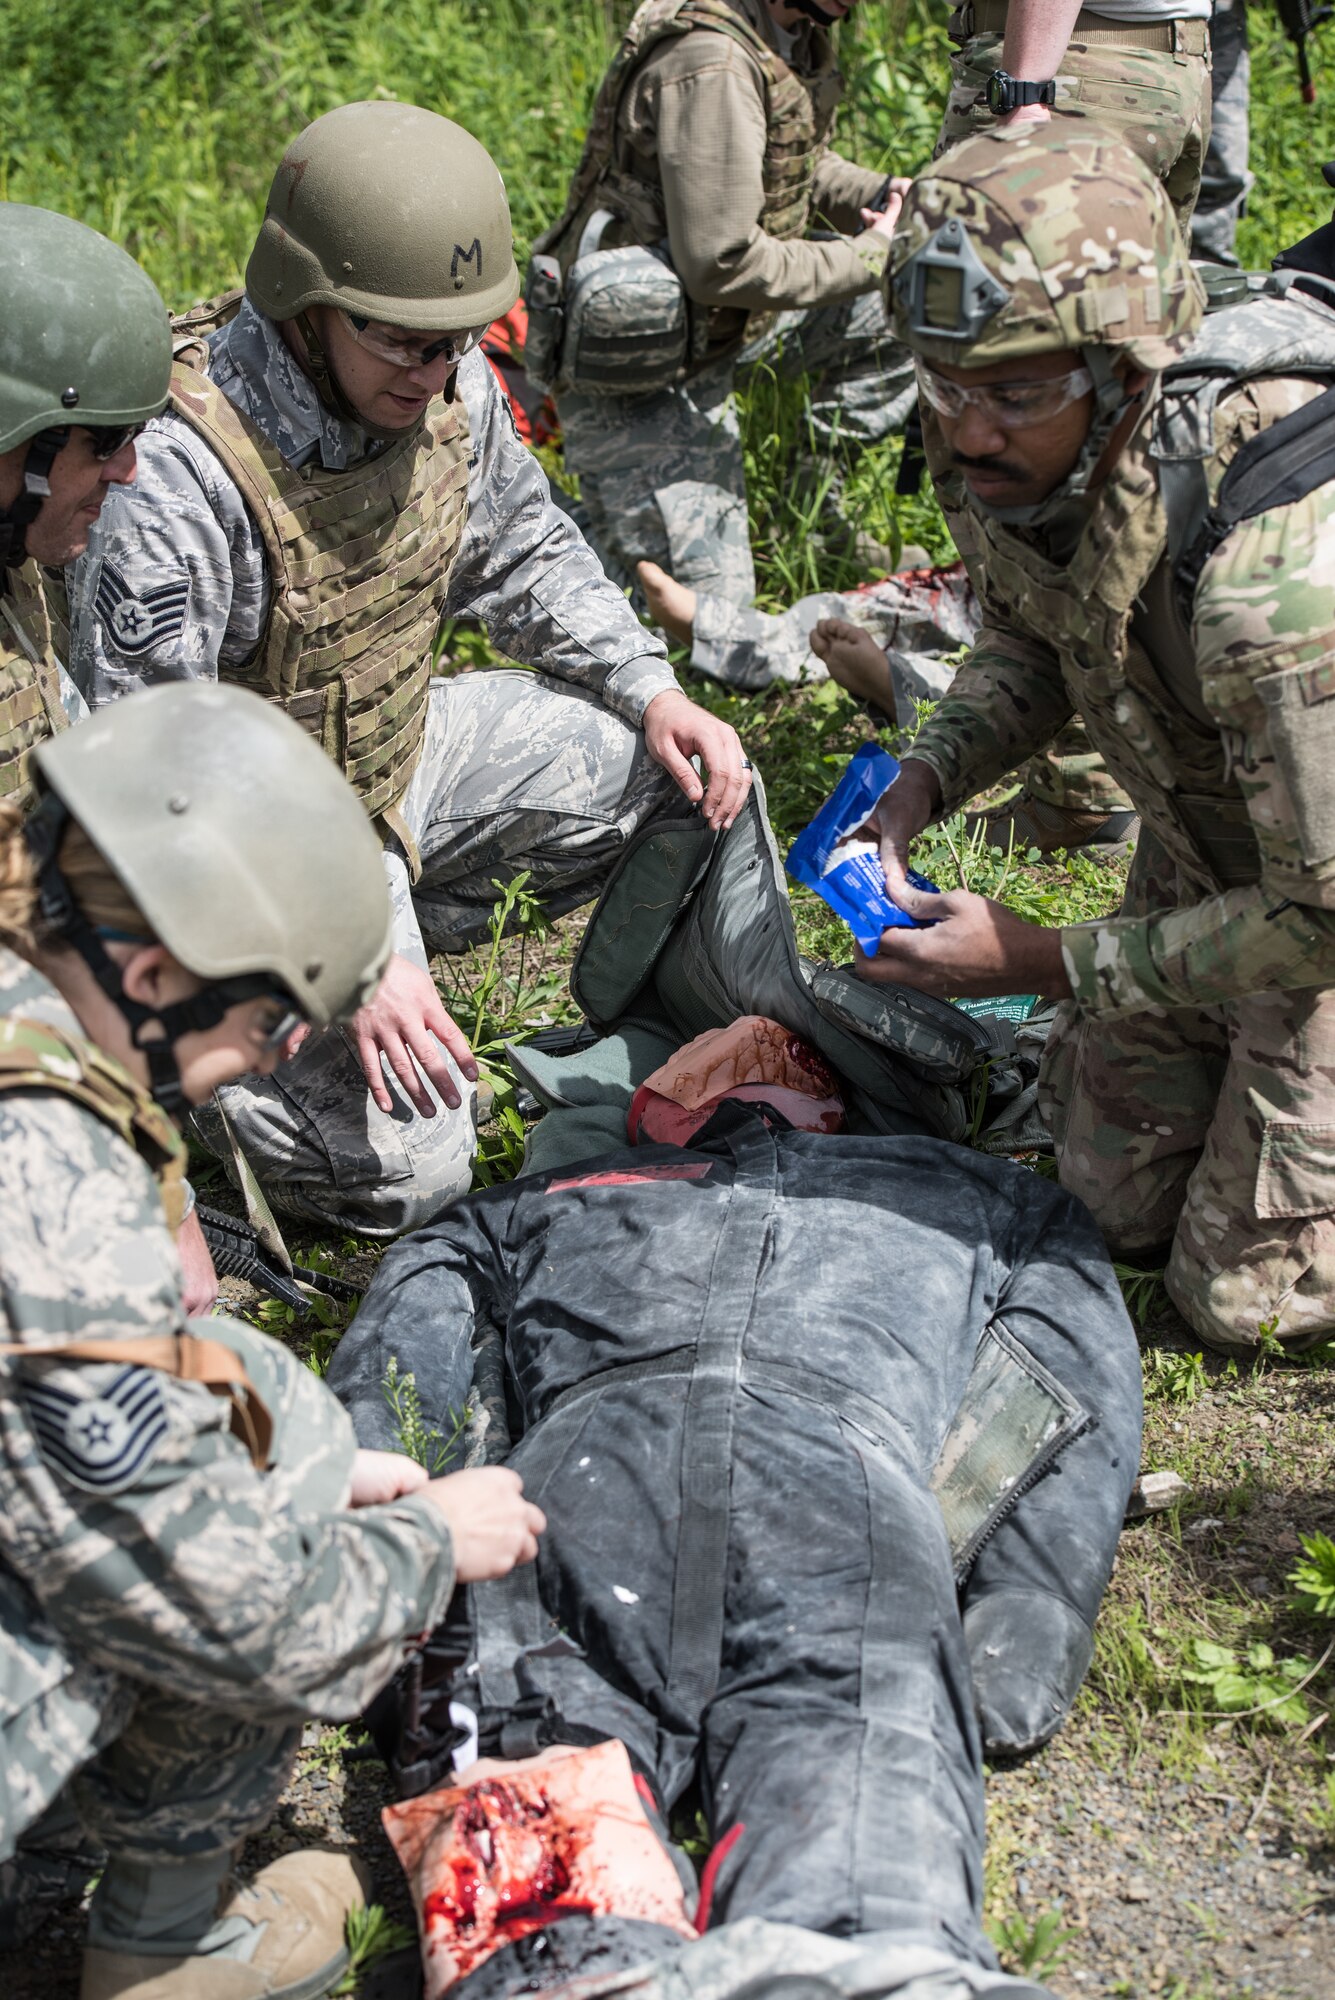 U.S. Airmen from the 193rd Special Operations Medical Group Detachment 1, Pennsylvania Air National Guard, perform medical treatment on a casualty during Tactical Combat Casualty Care training.